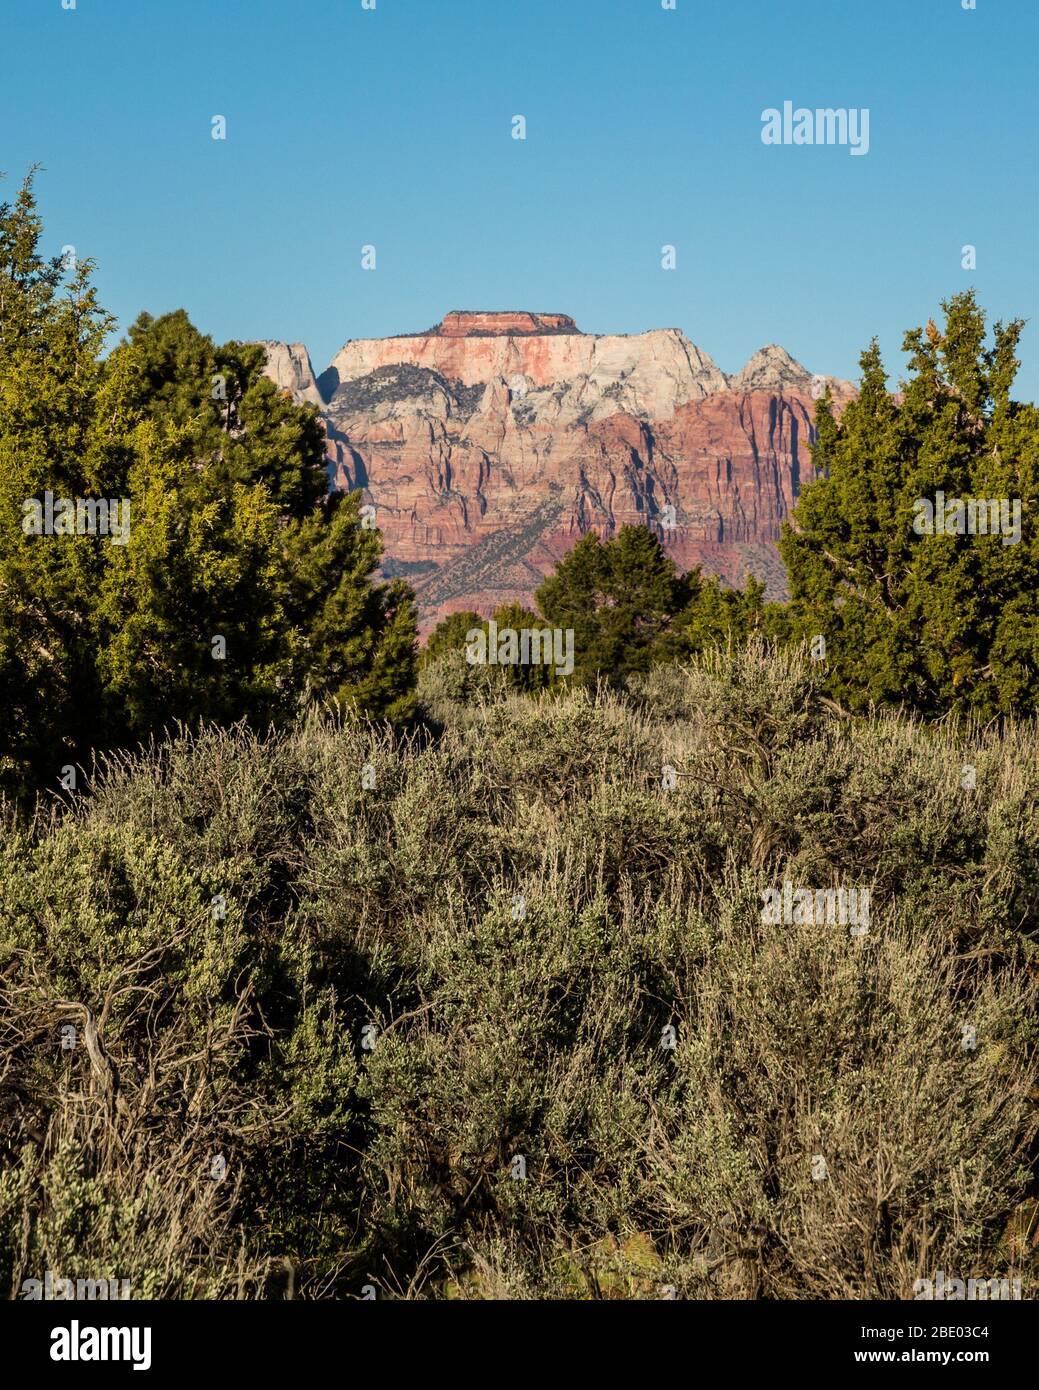 Looking through tall green juniper and pinyon pine trees at a massive red and white layered sandstone mesa in the southern Utah desert. Stock Photo